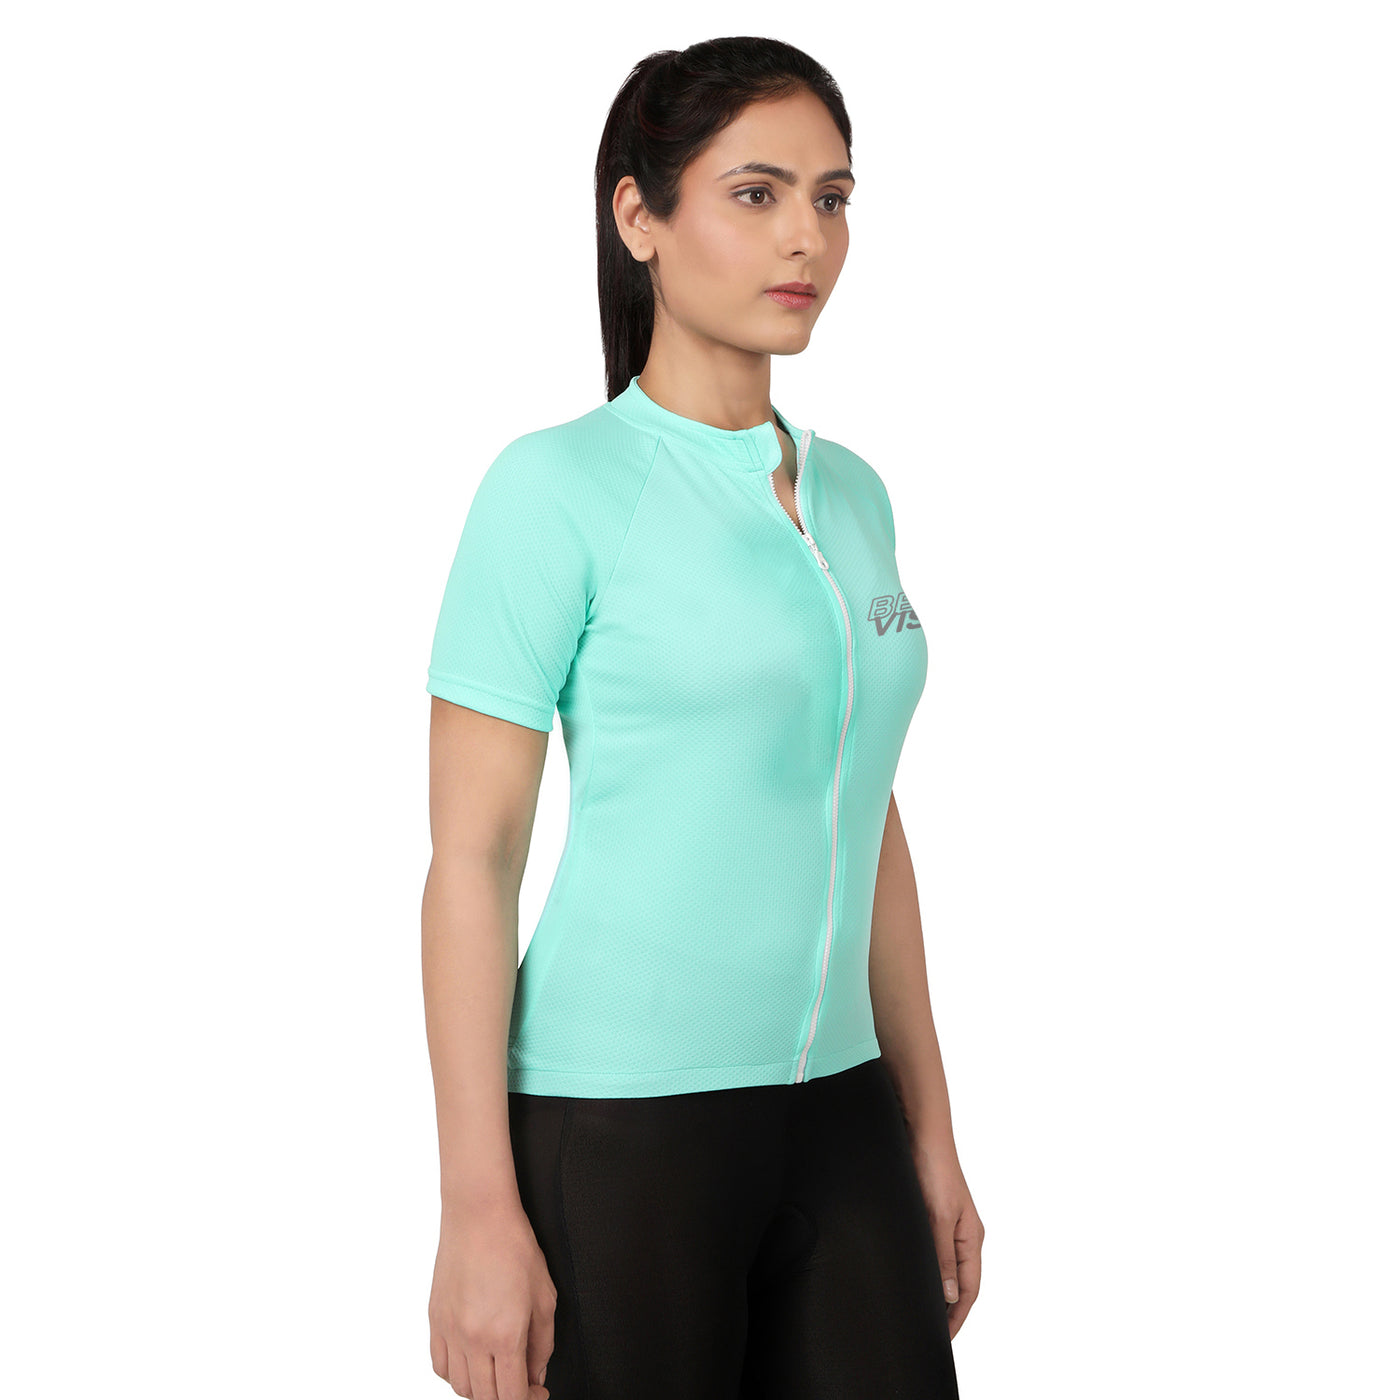 Triquip BeVisible Cycling Jersey Women Half Sleeves - Sea Green - Cyclop.in